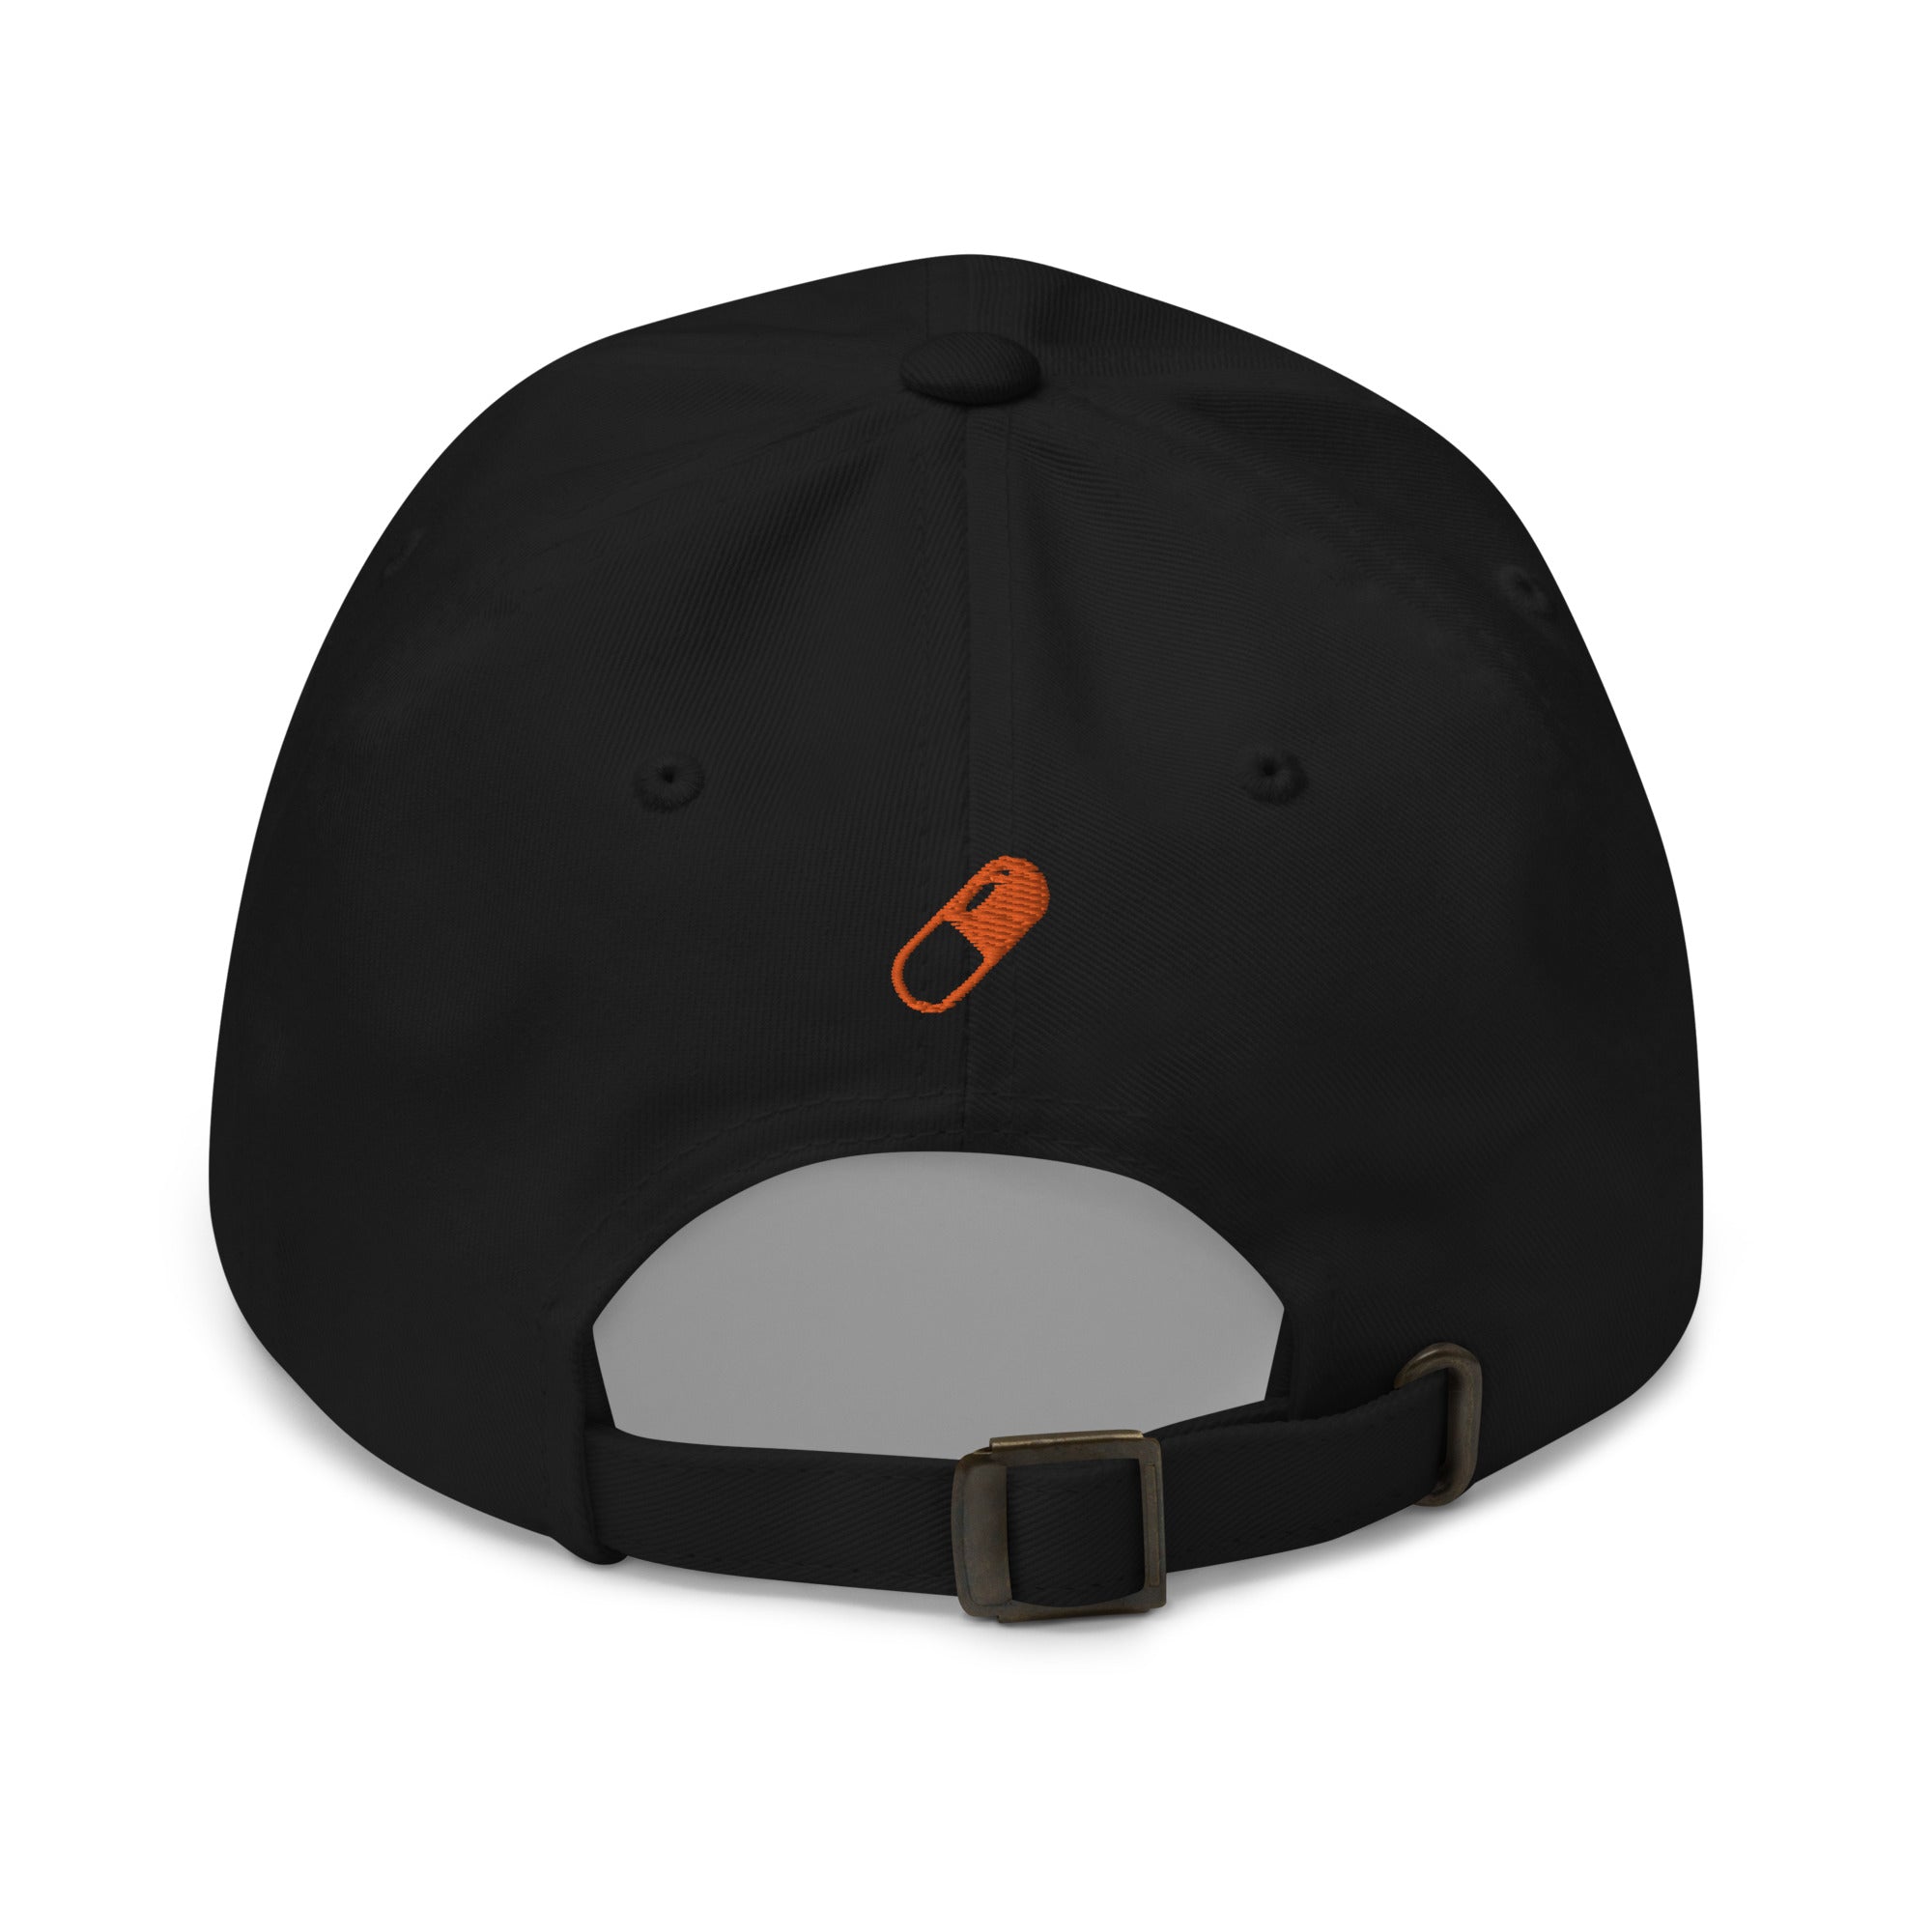 Bitcoin Headwear - The Orange Pilled Hat features embroidered designs on the front and back of a black cap. Back view. 